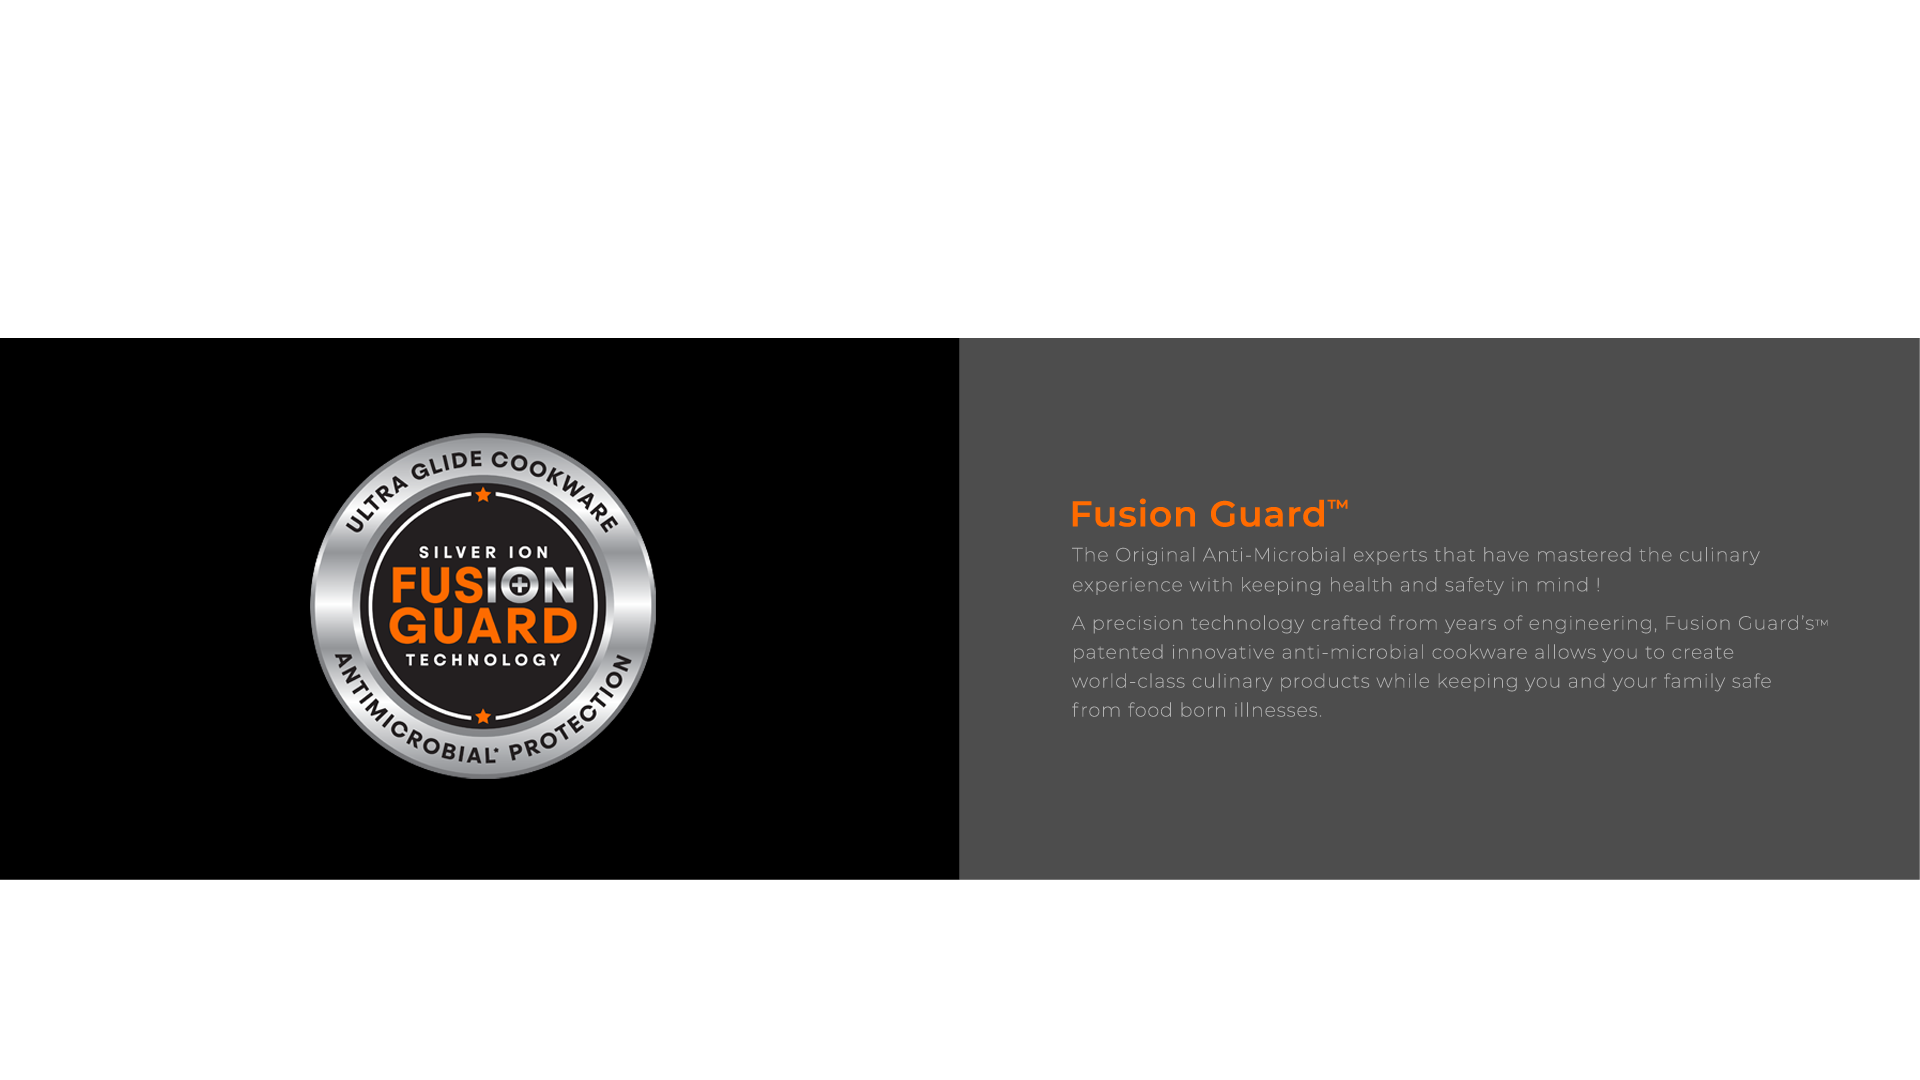 Fusion Guard Ultra Glide Cookware - Antimicrobial Protection